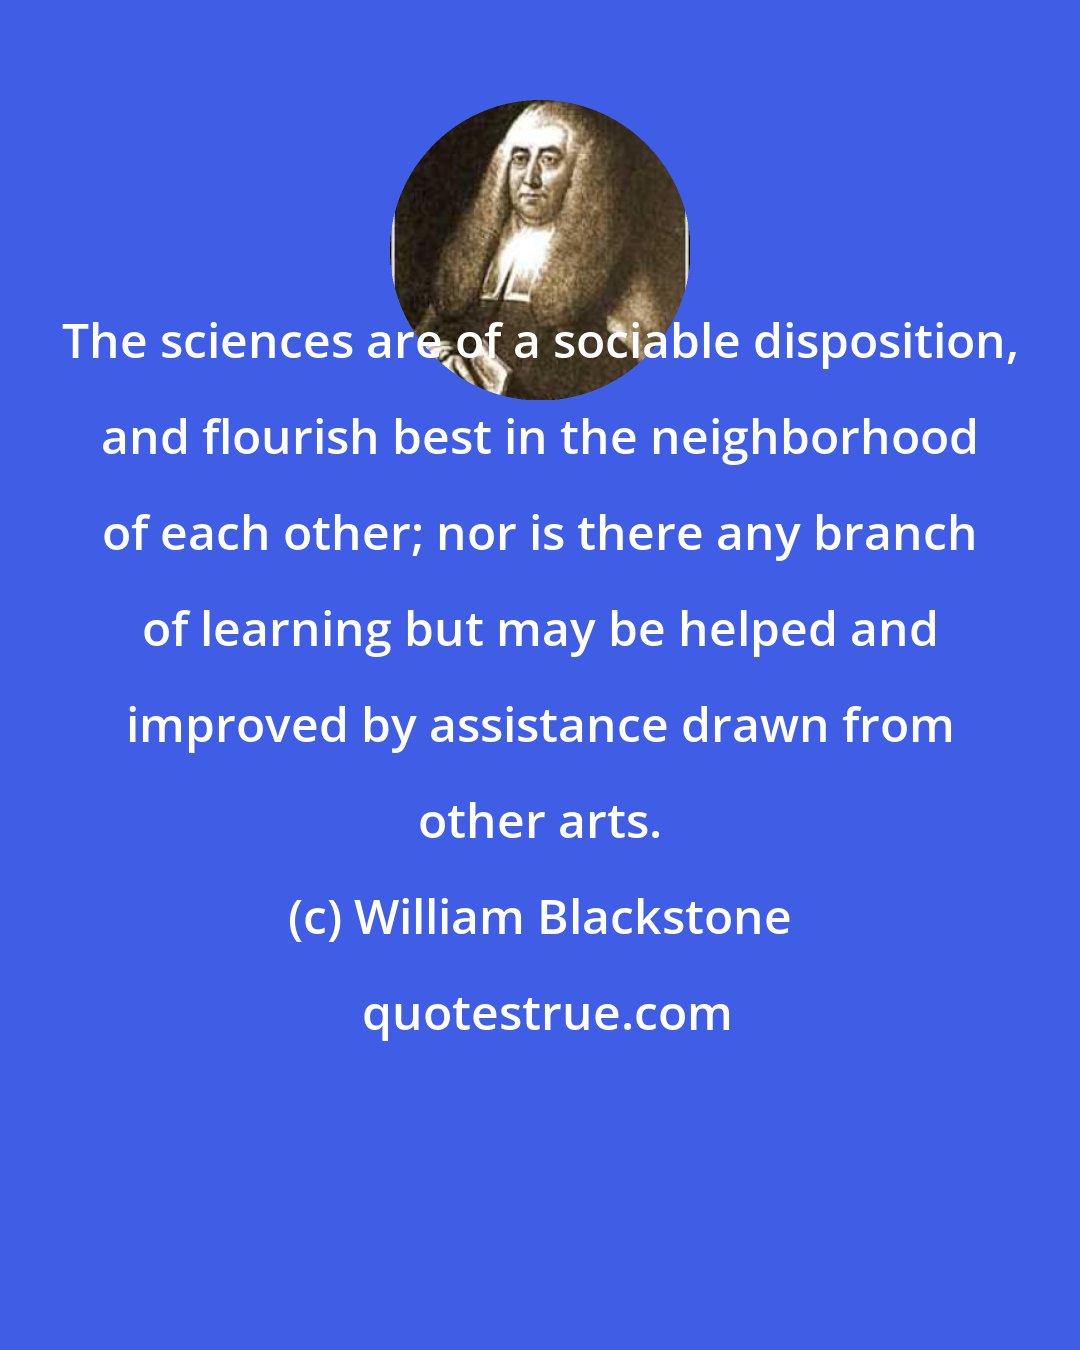 William Blackstone: The sciences are of a sociable disposition, and flourish best in the neighborhood of each other; nor is there any branch of learning but may be helped and improved by assistance drawn from other arts.